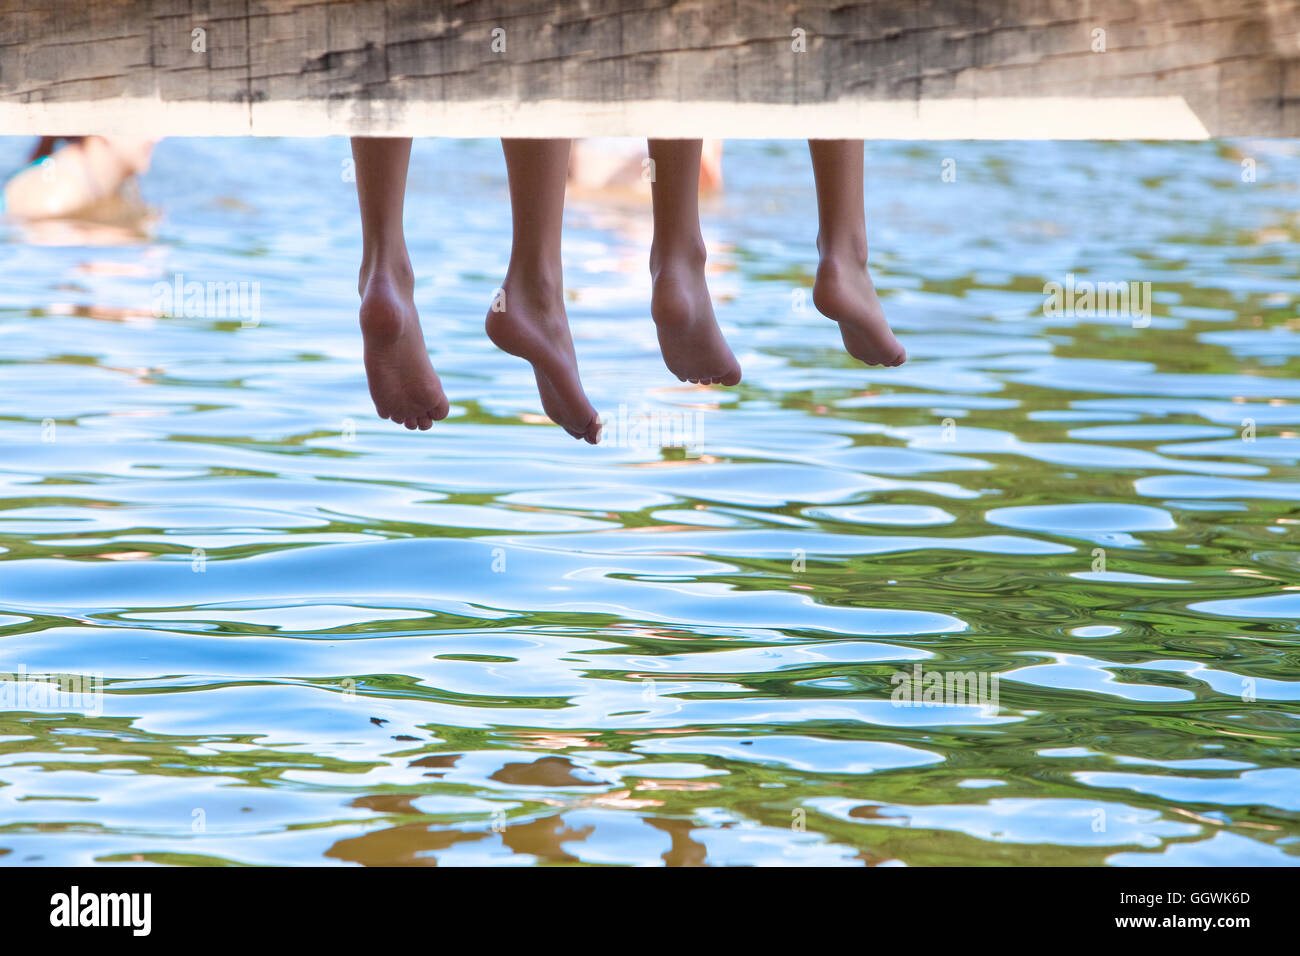 Boys Legs Dangling Down from Wooden Pier over Water Stock Photo